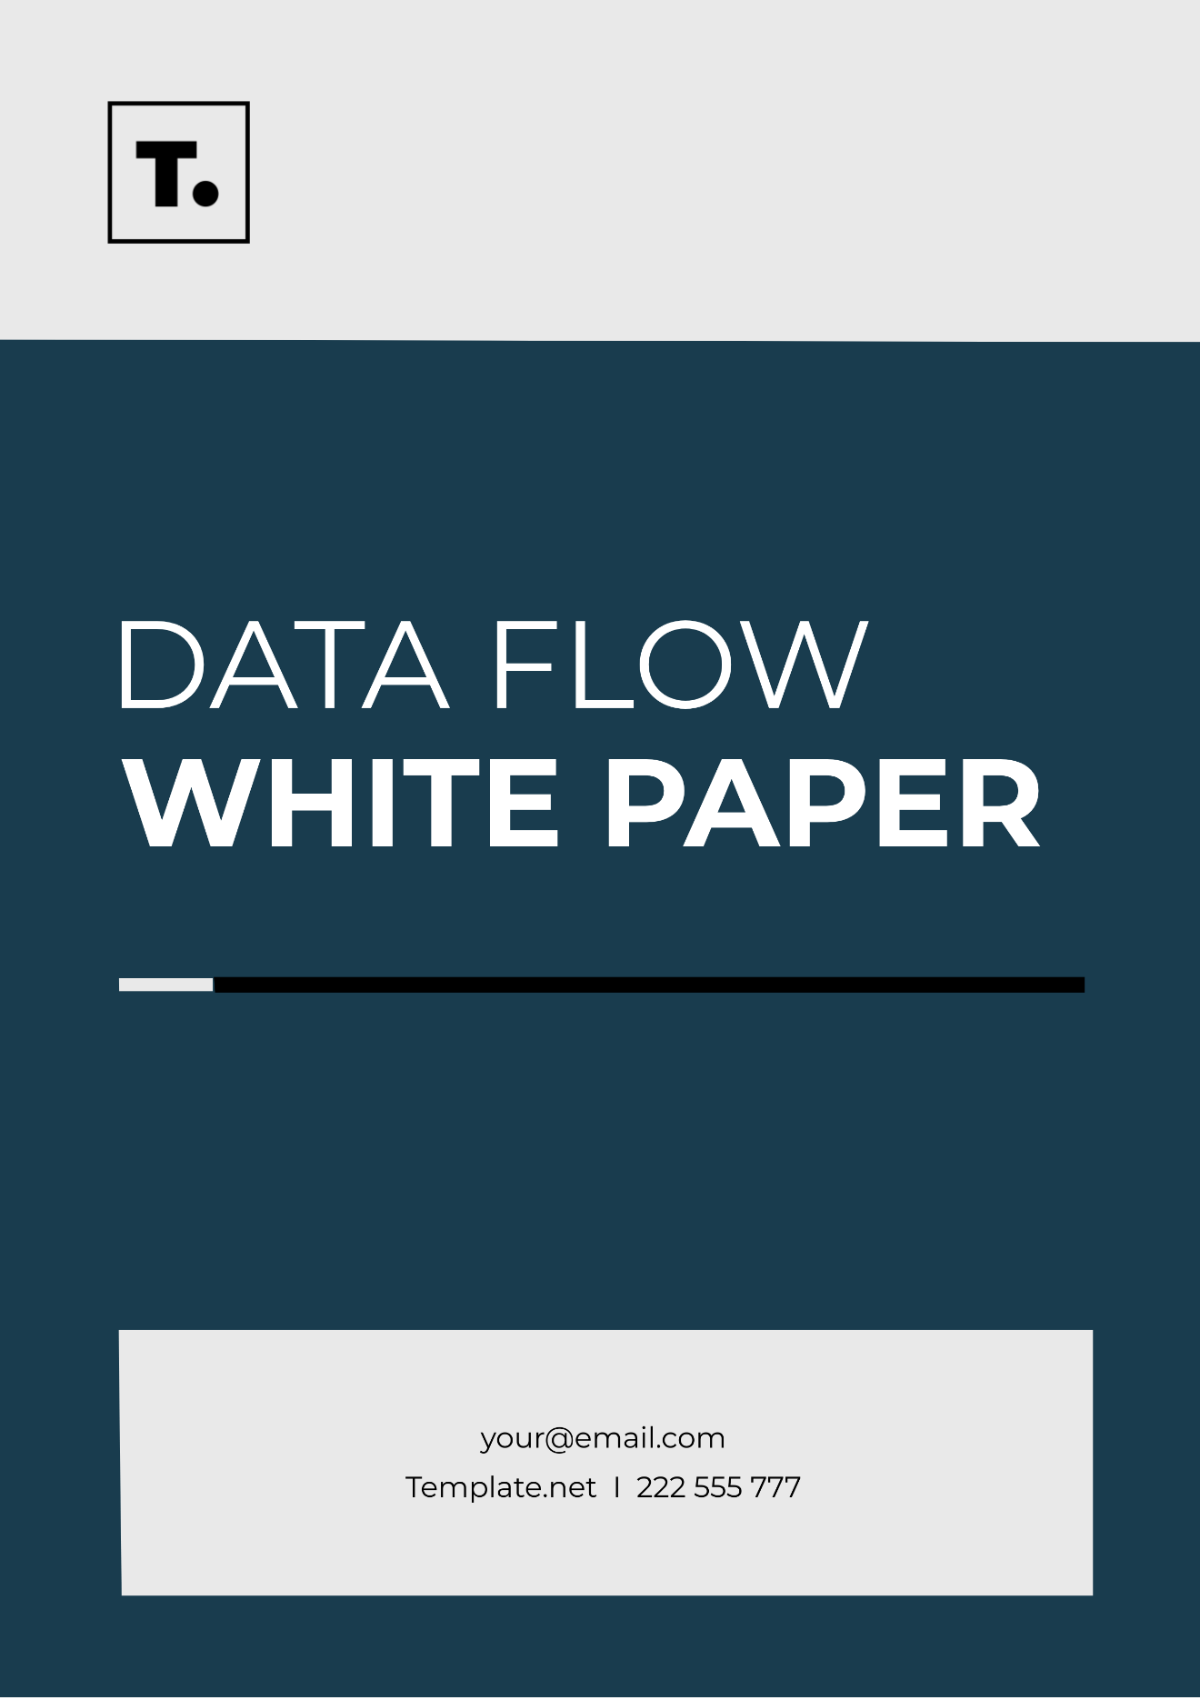 Data Flow White Paper Template